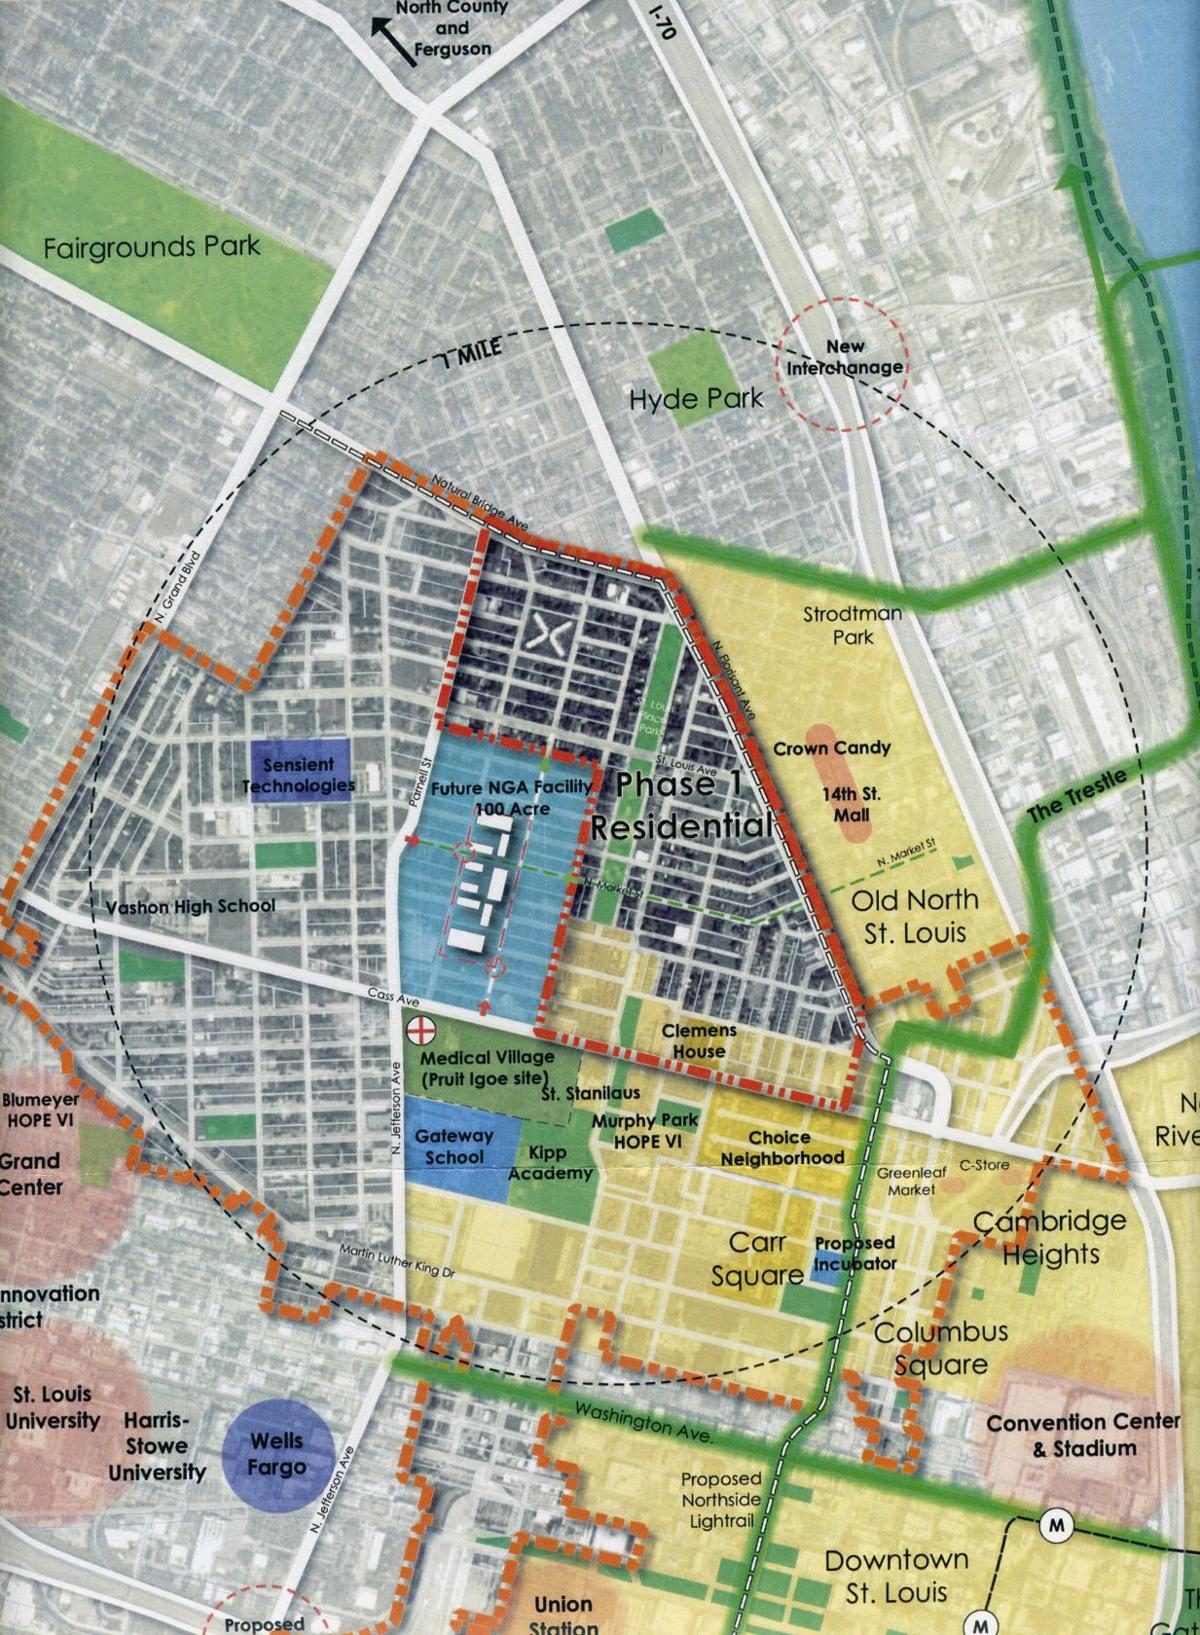 McKee plans 500-unit housing project near NGA site | Political Fix | www.waterandnature.org